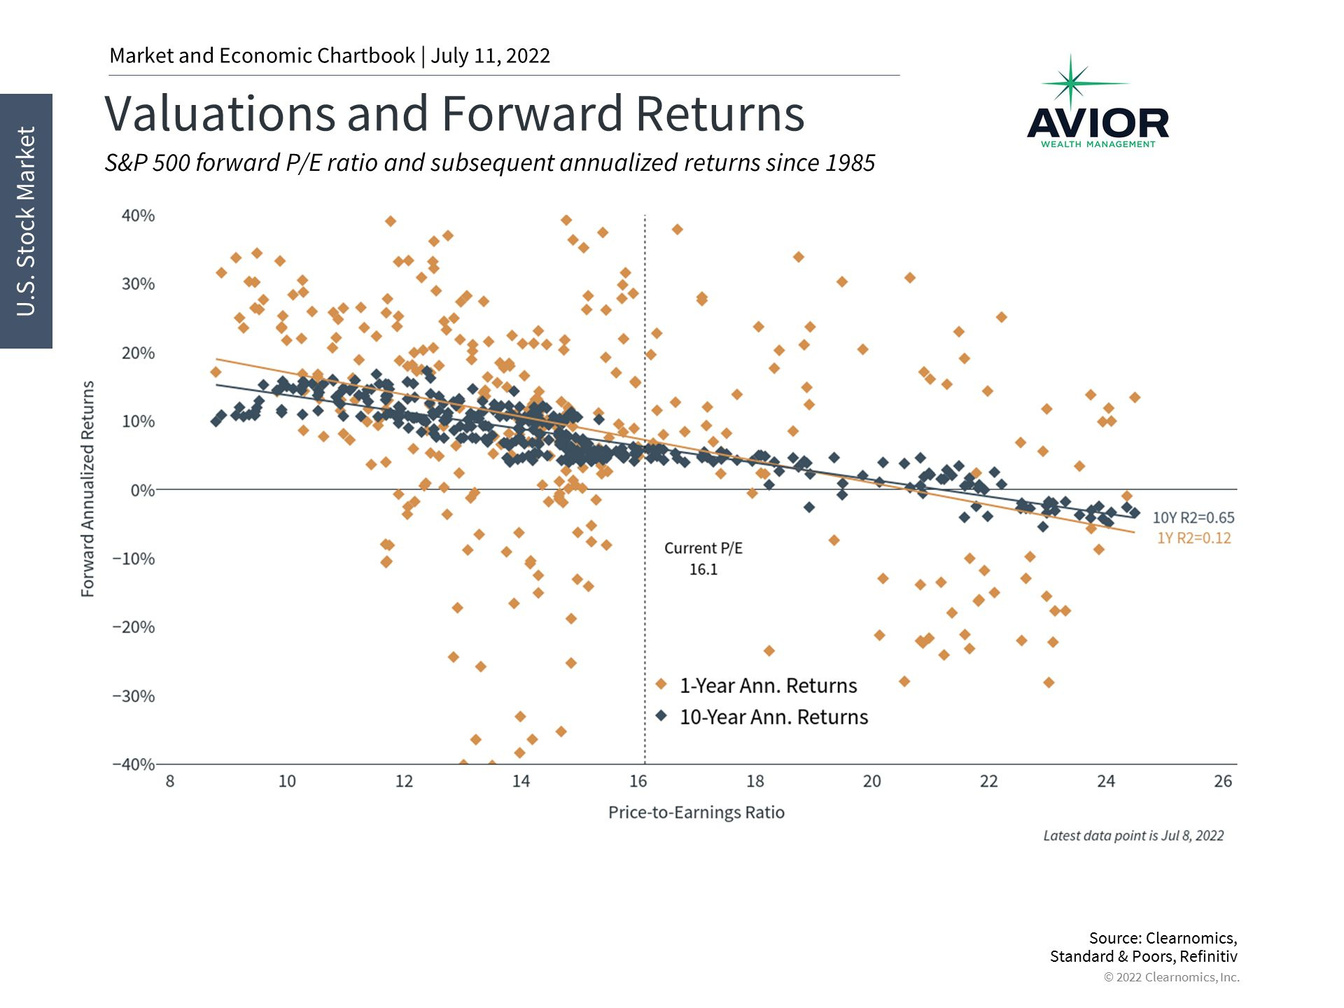 Valuations and Forward Returns